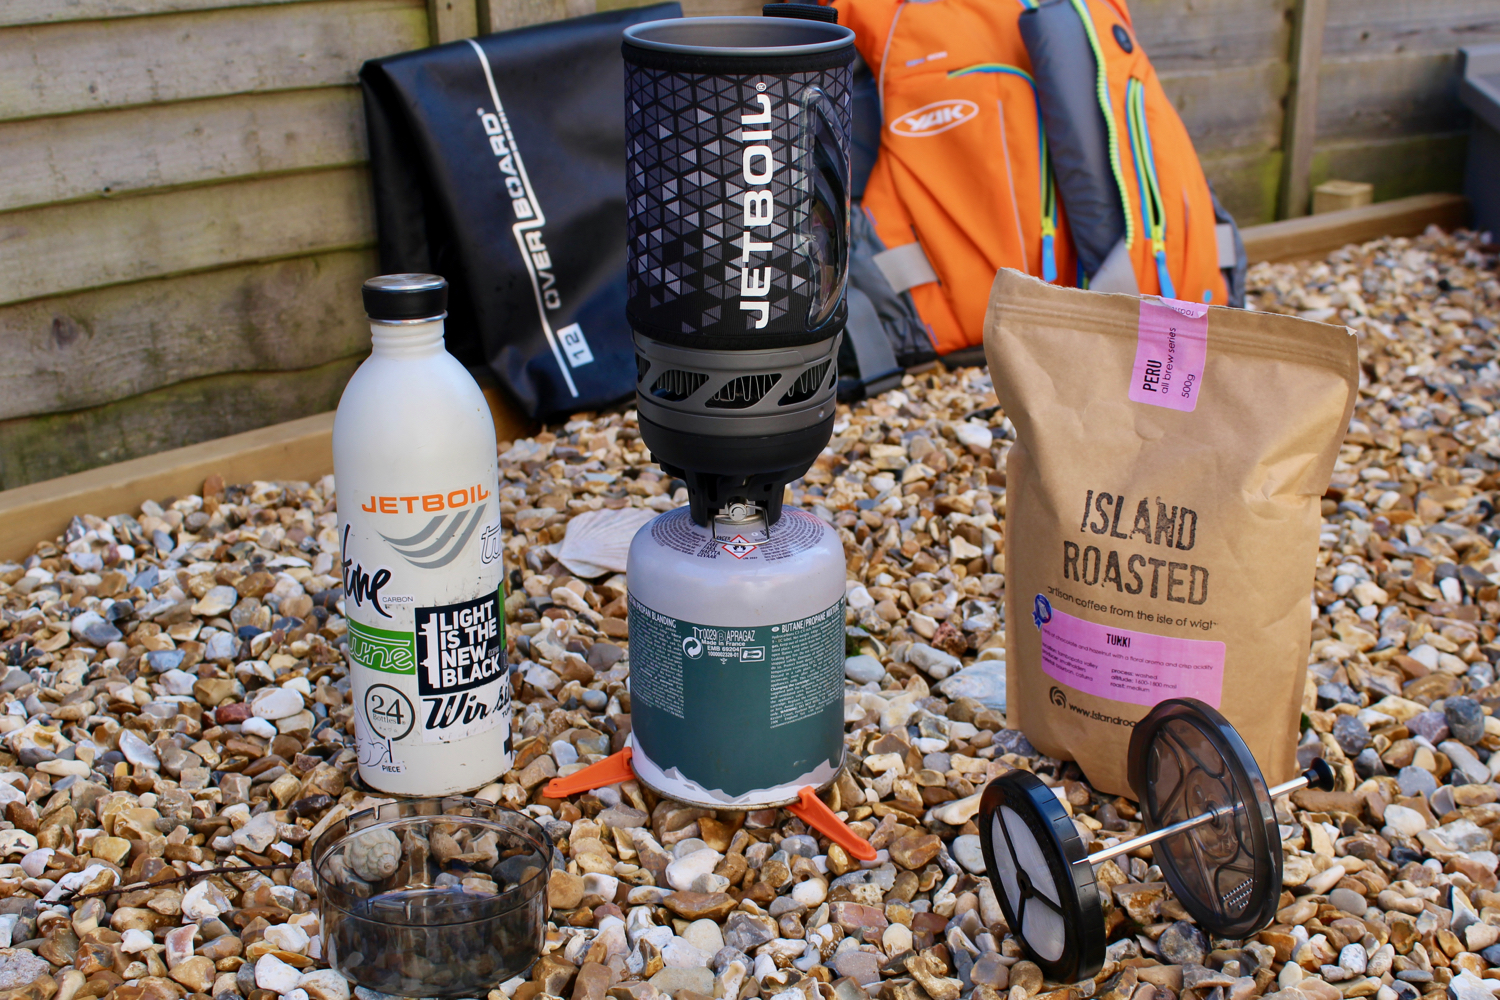 Jetboil MiniMo Stove - Review